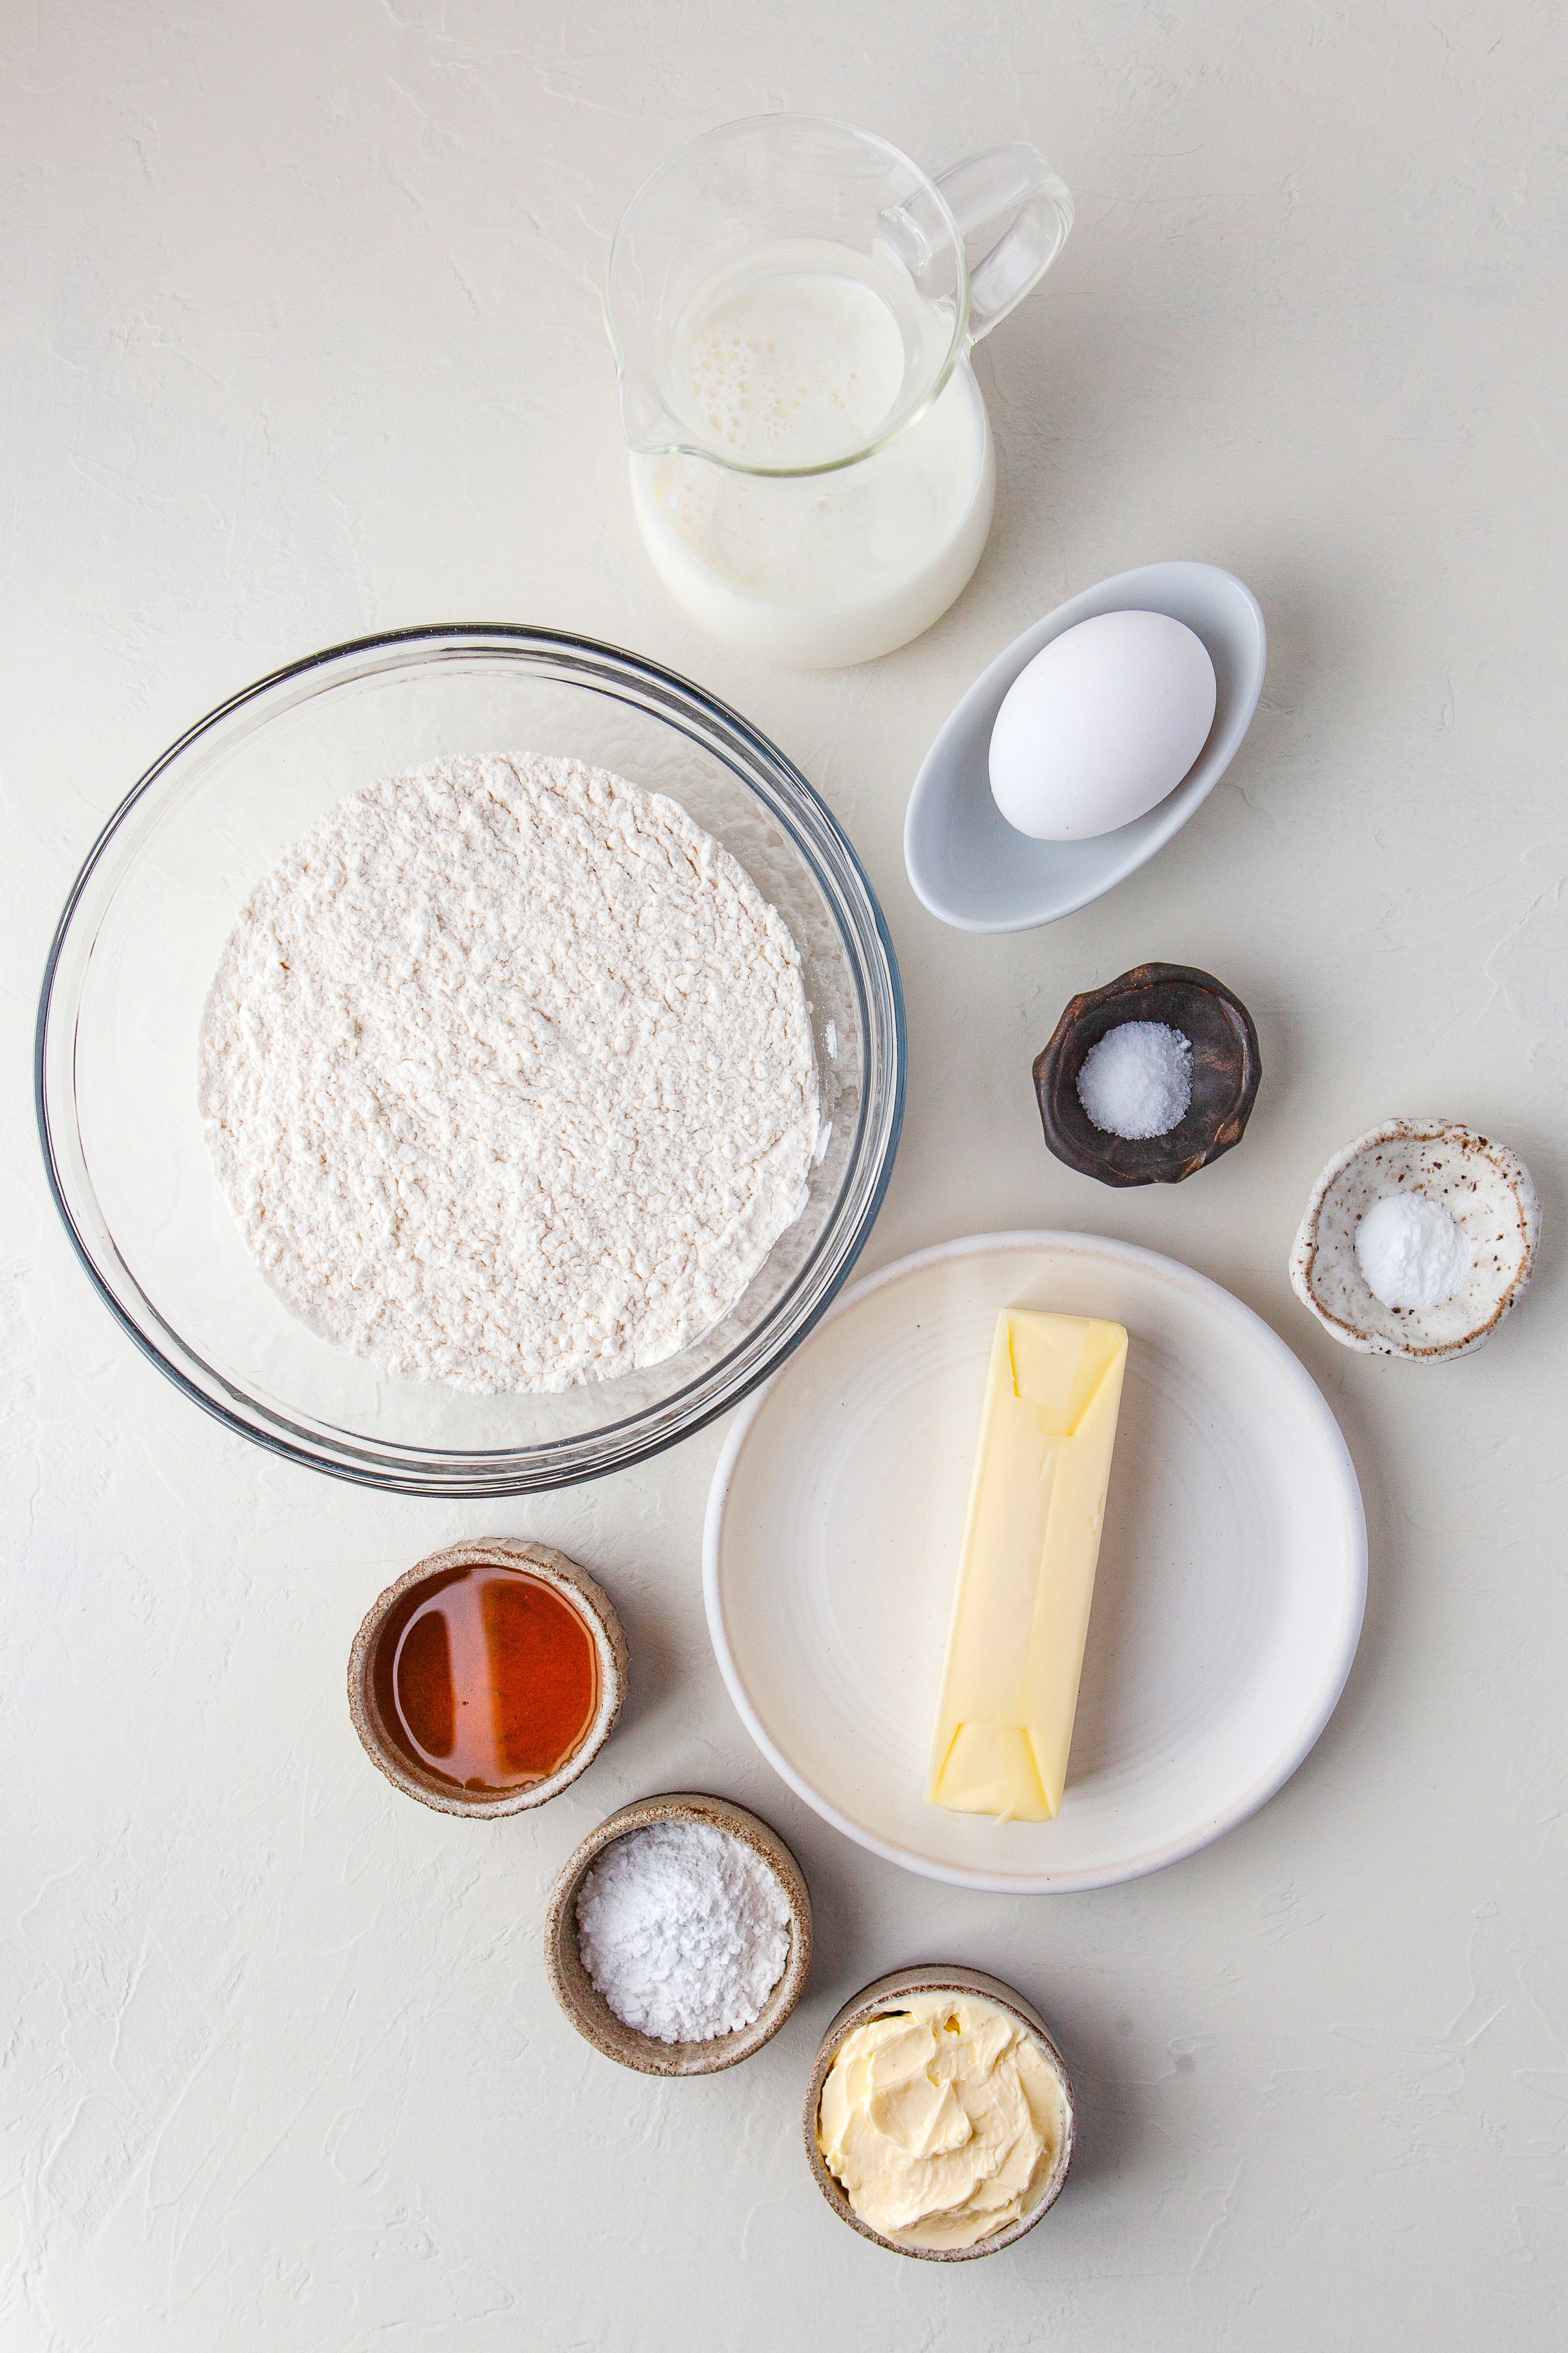 Measure ingredients needed to make this recipe presented on a white marble countertop.